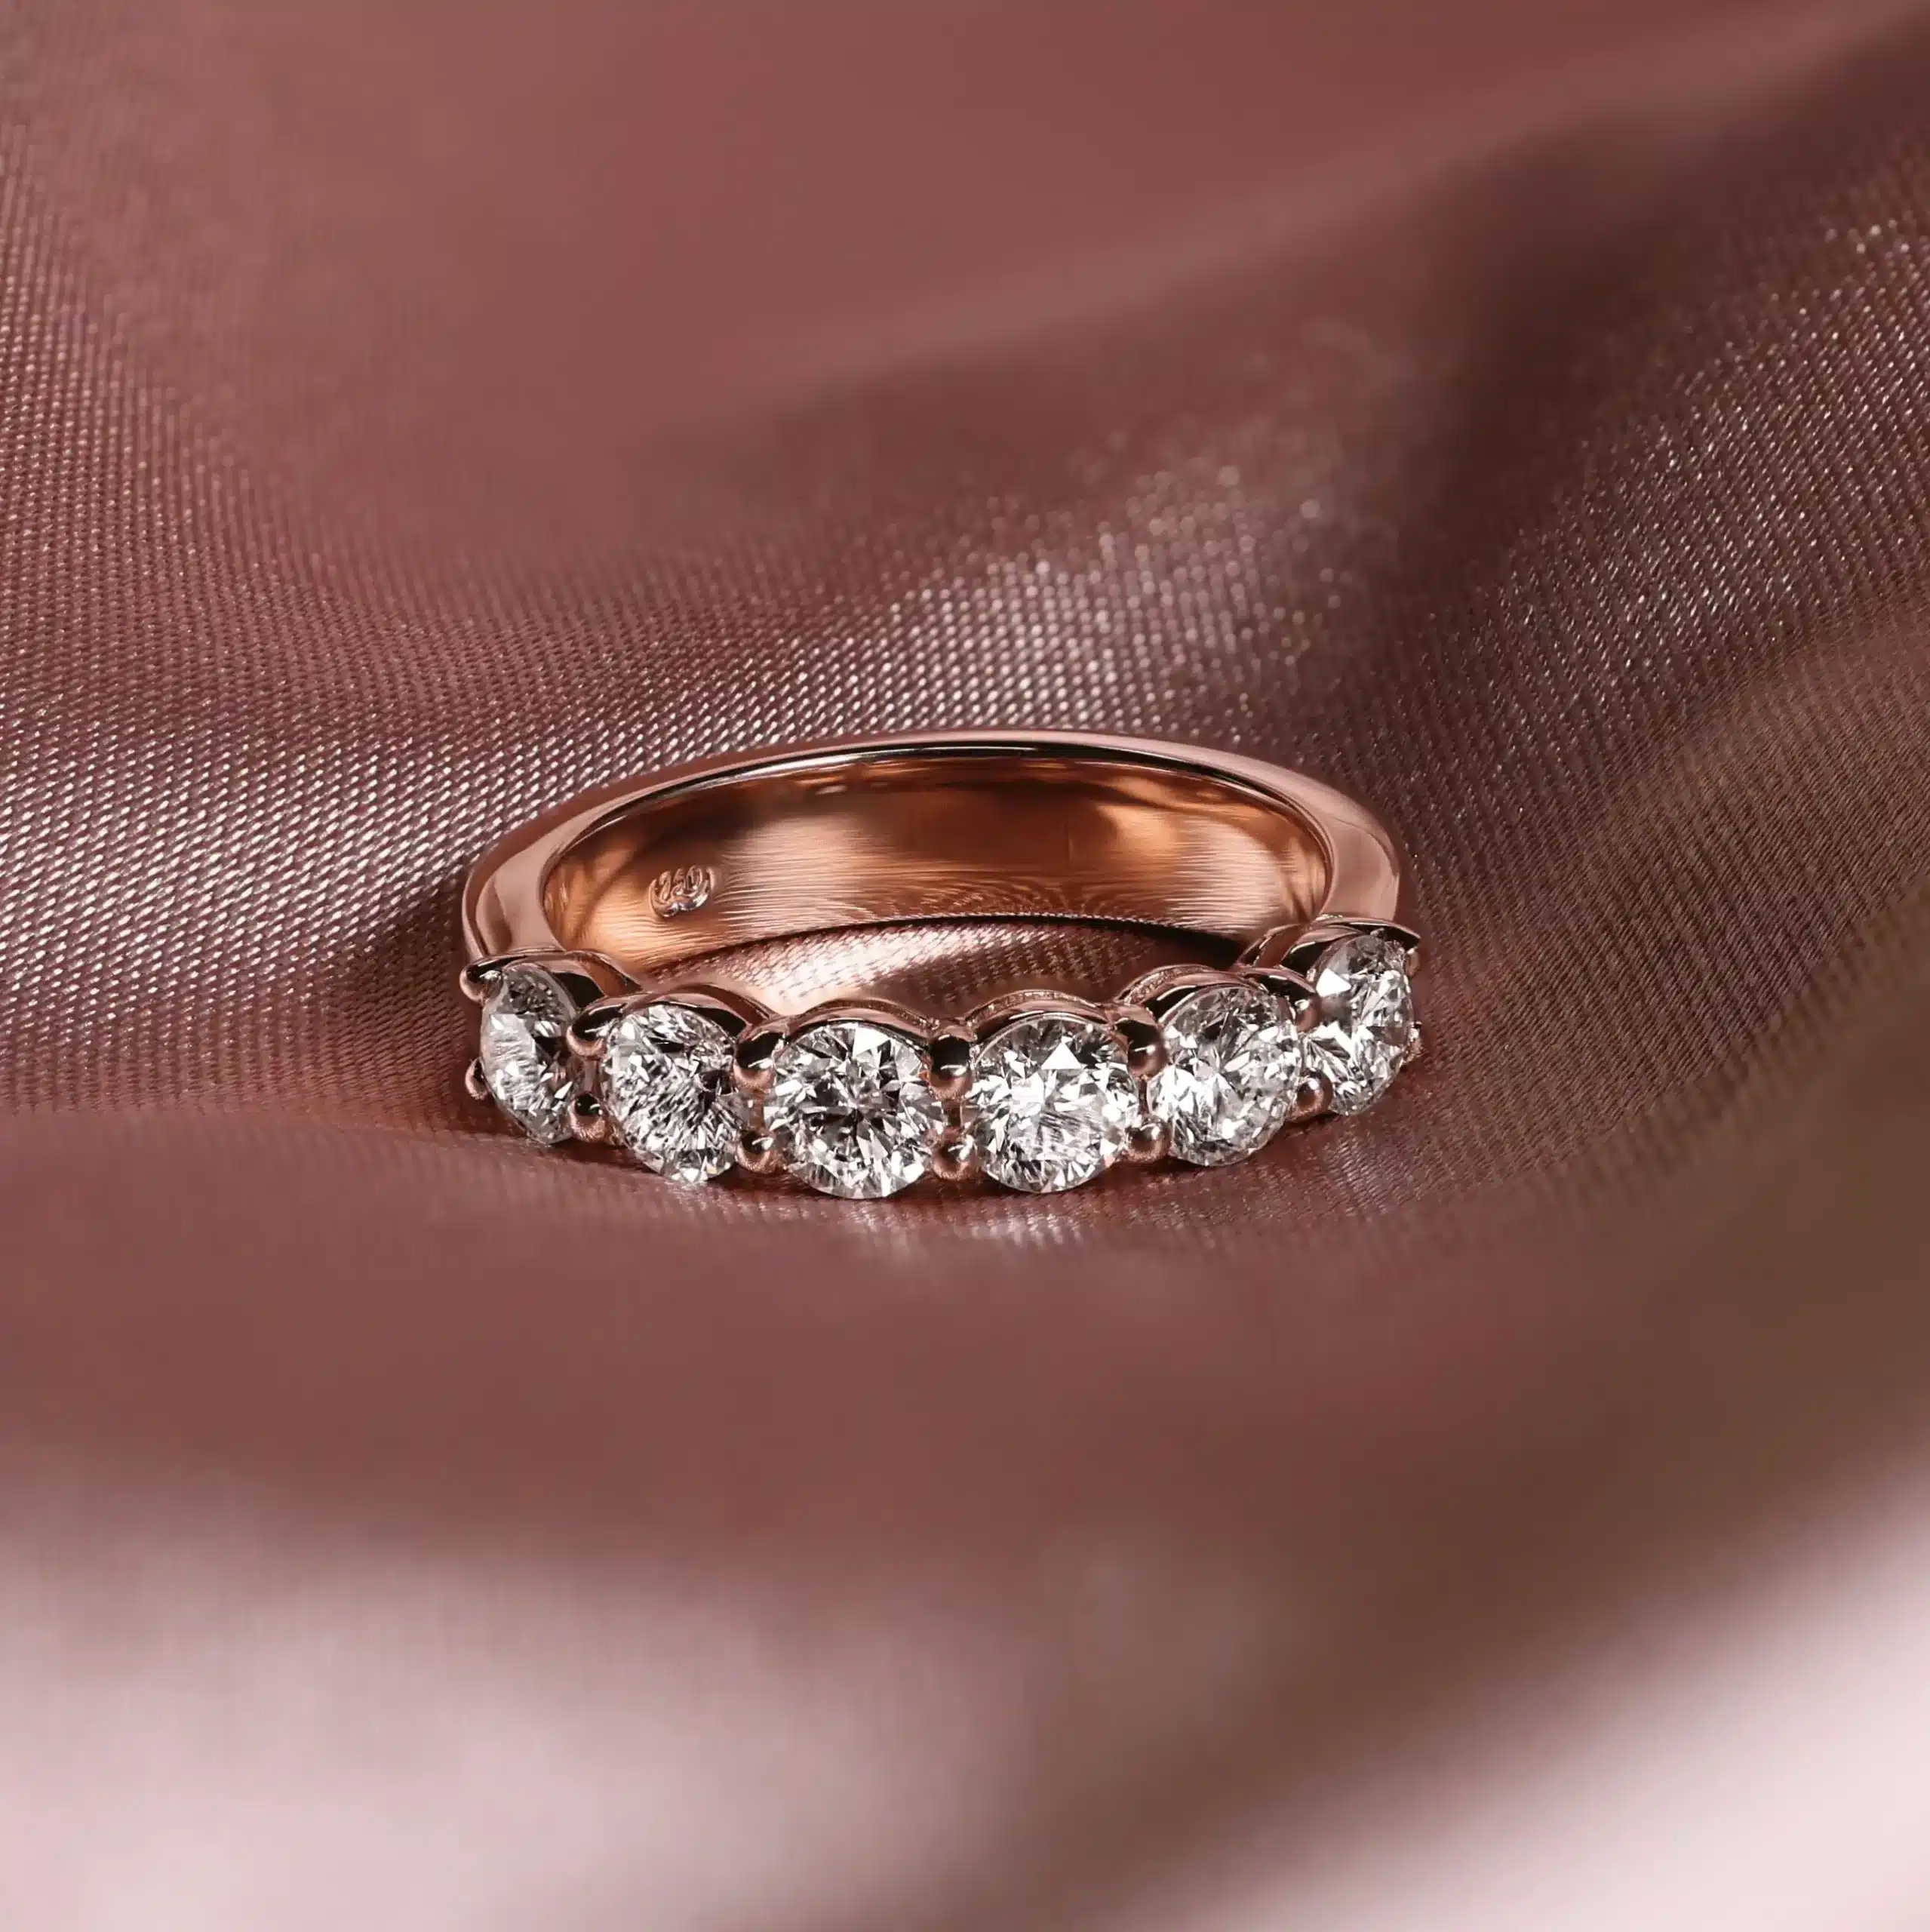 Our-rings-eternity-ring-rose-gold